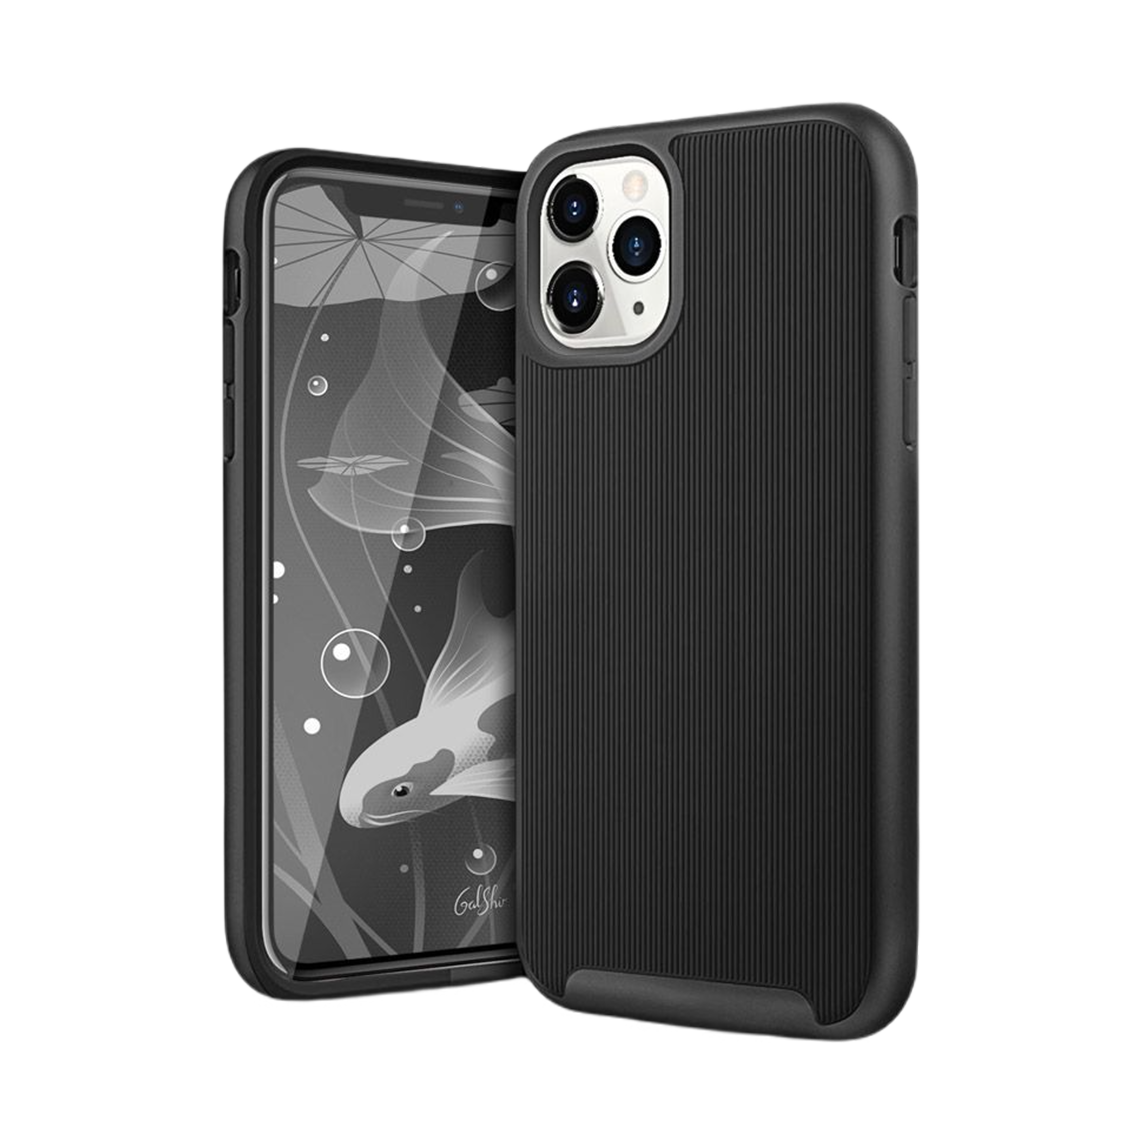 Wavelength Case For iPhone 11 Pro